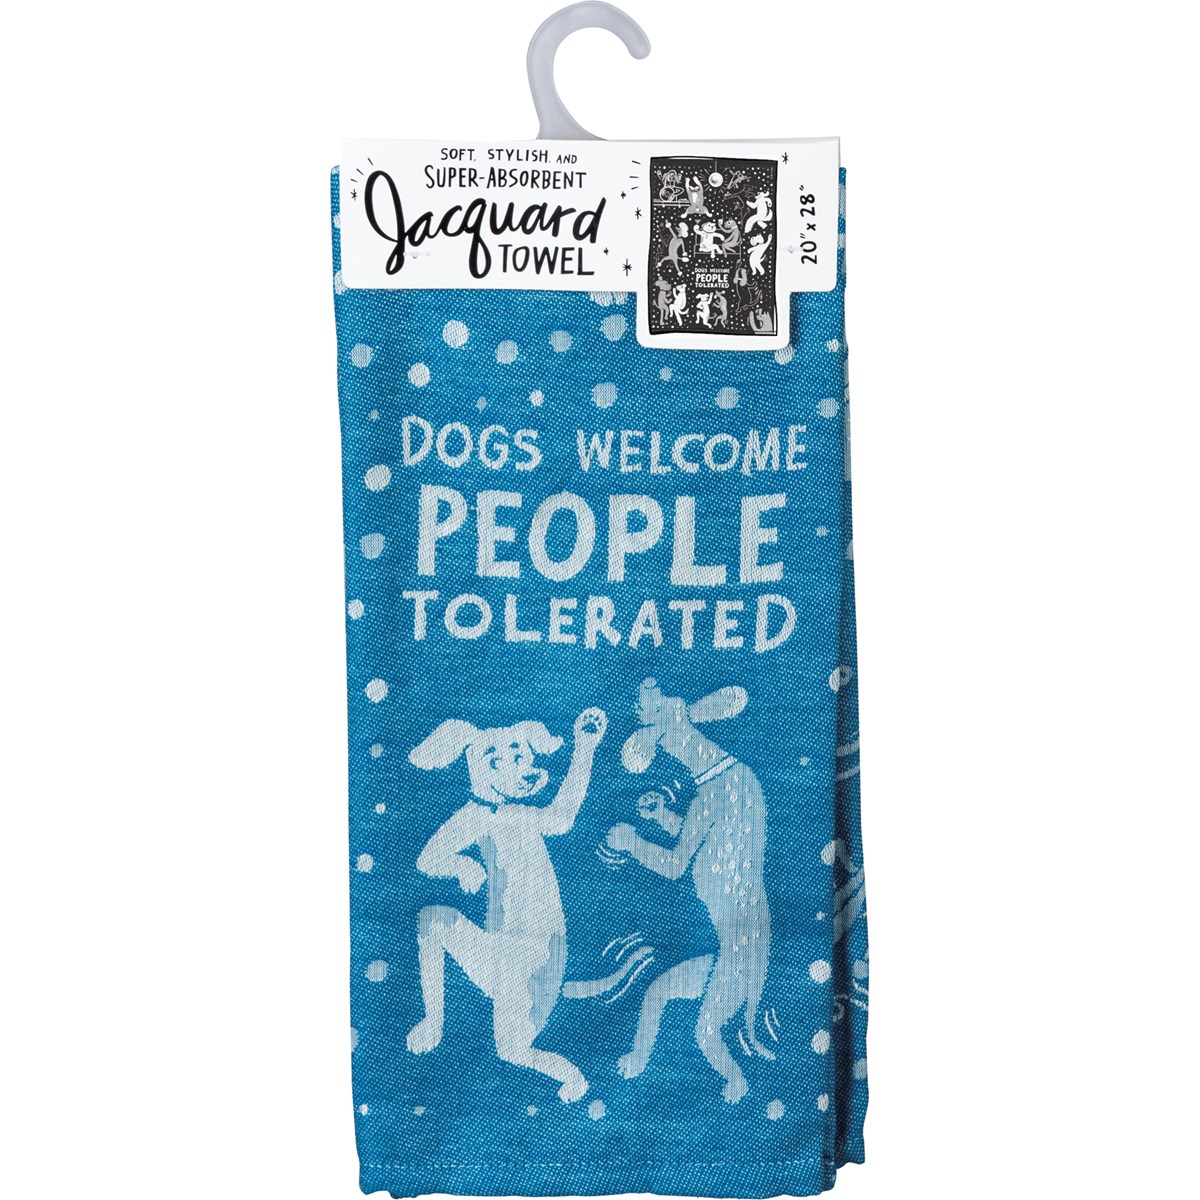 Dogs Welcome People Tolerated Kitchen Towel - Cotton